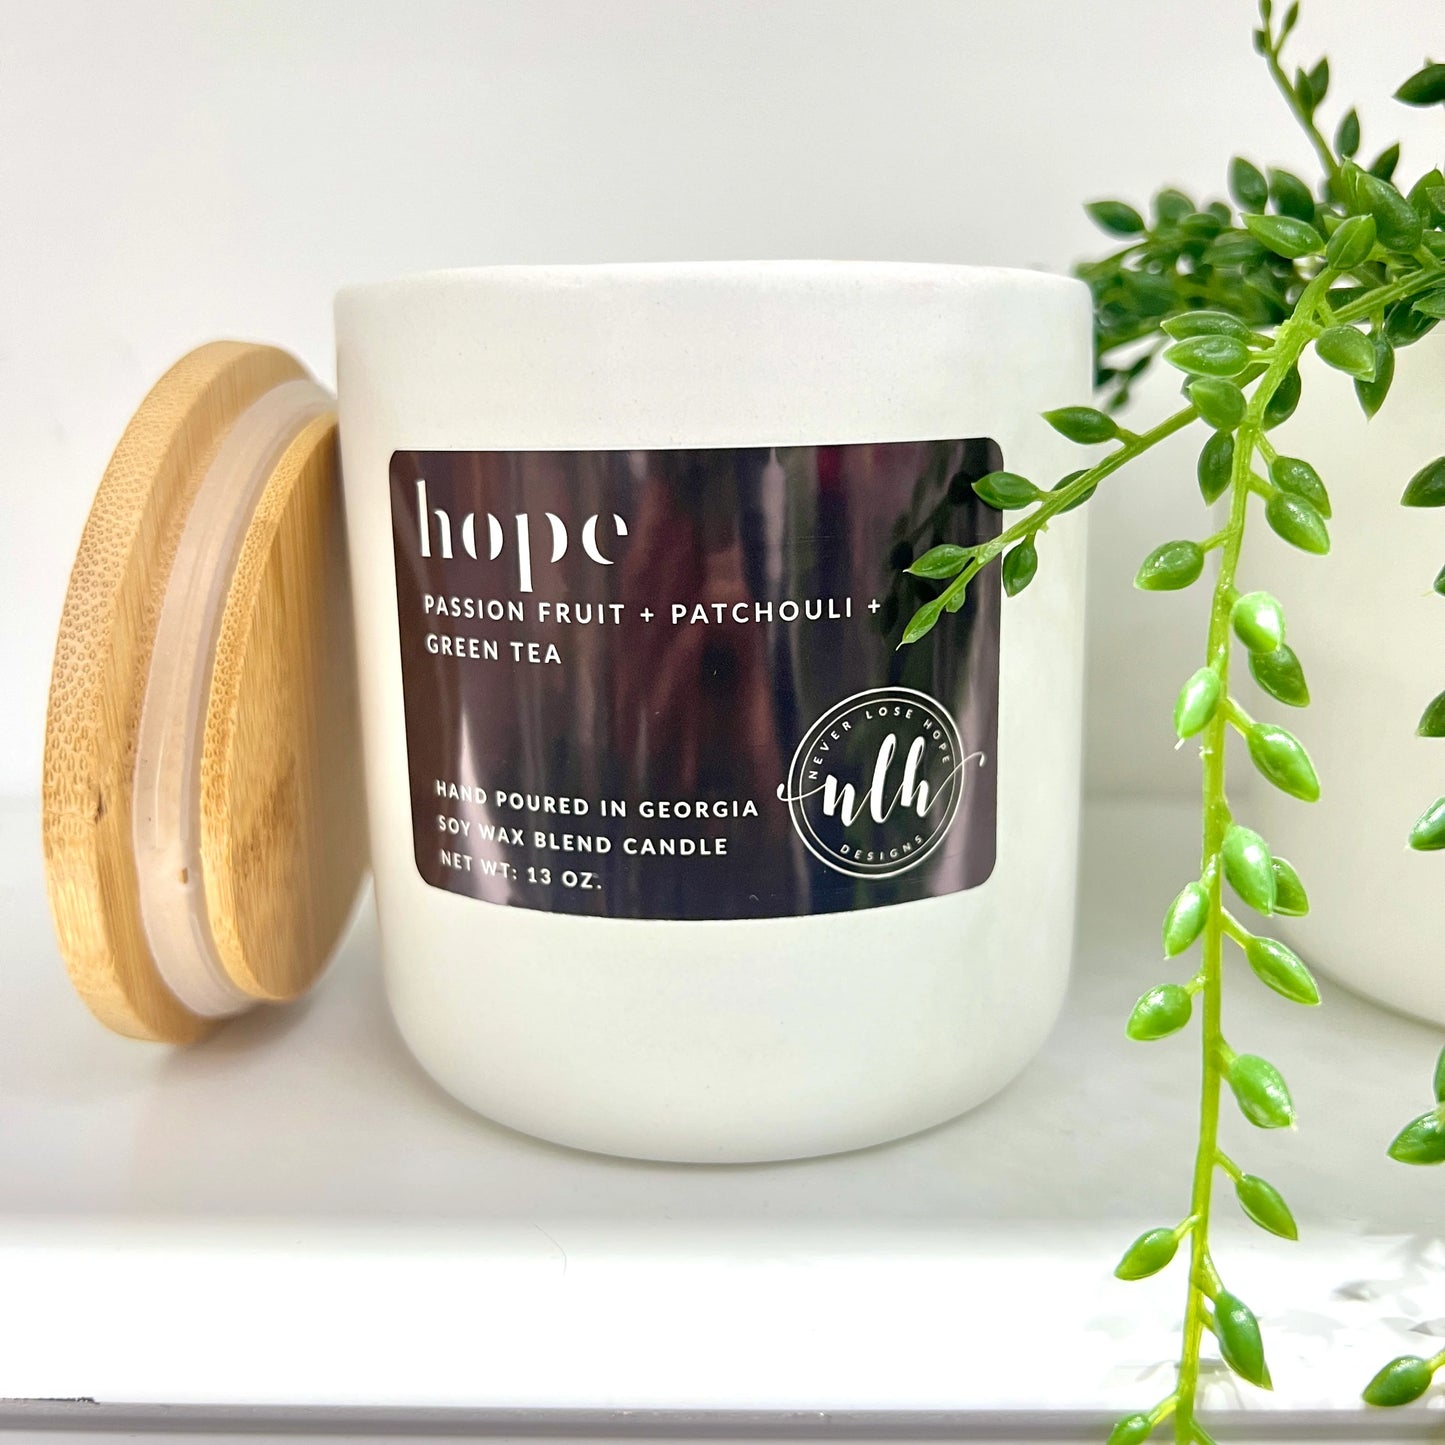 Never Lose Hope® Soy wax blend Candle- "Hope"